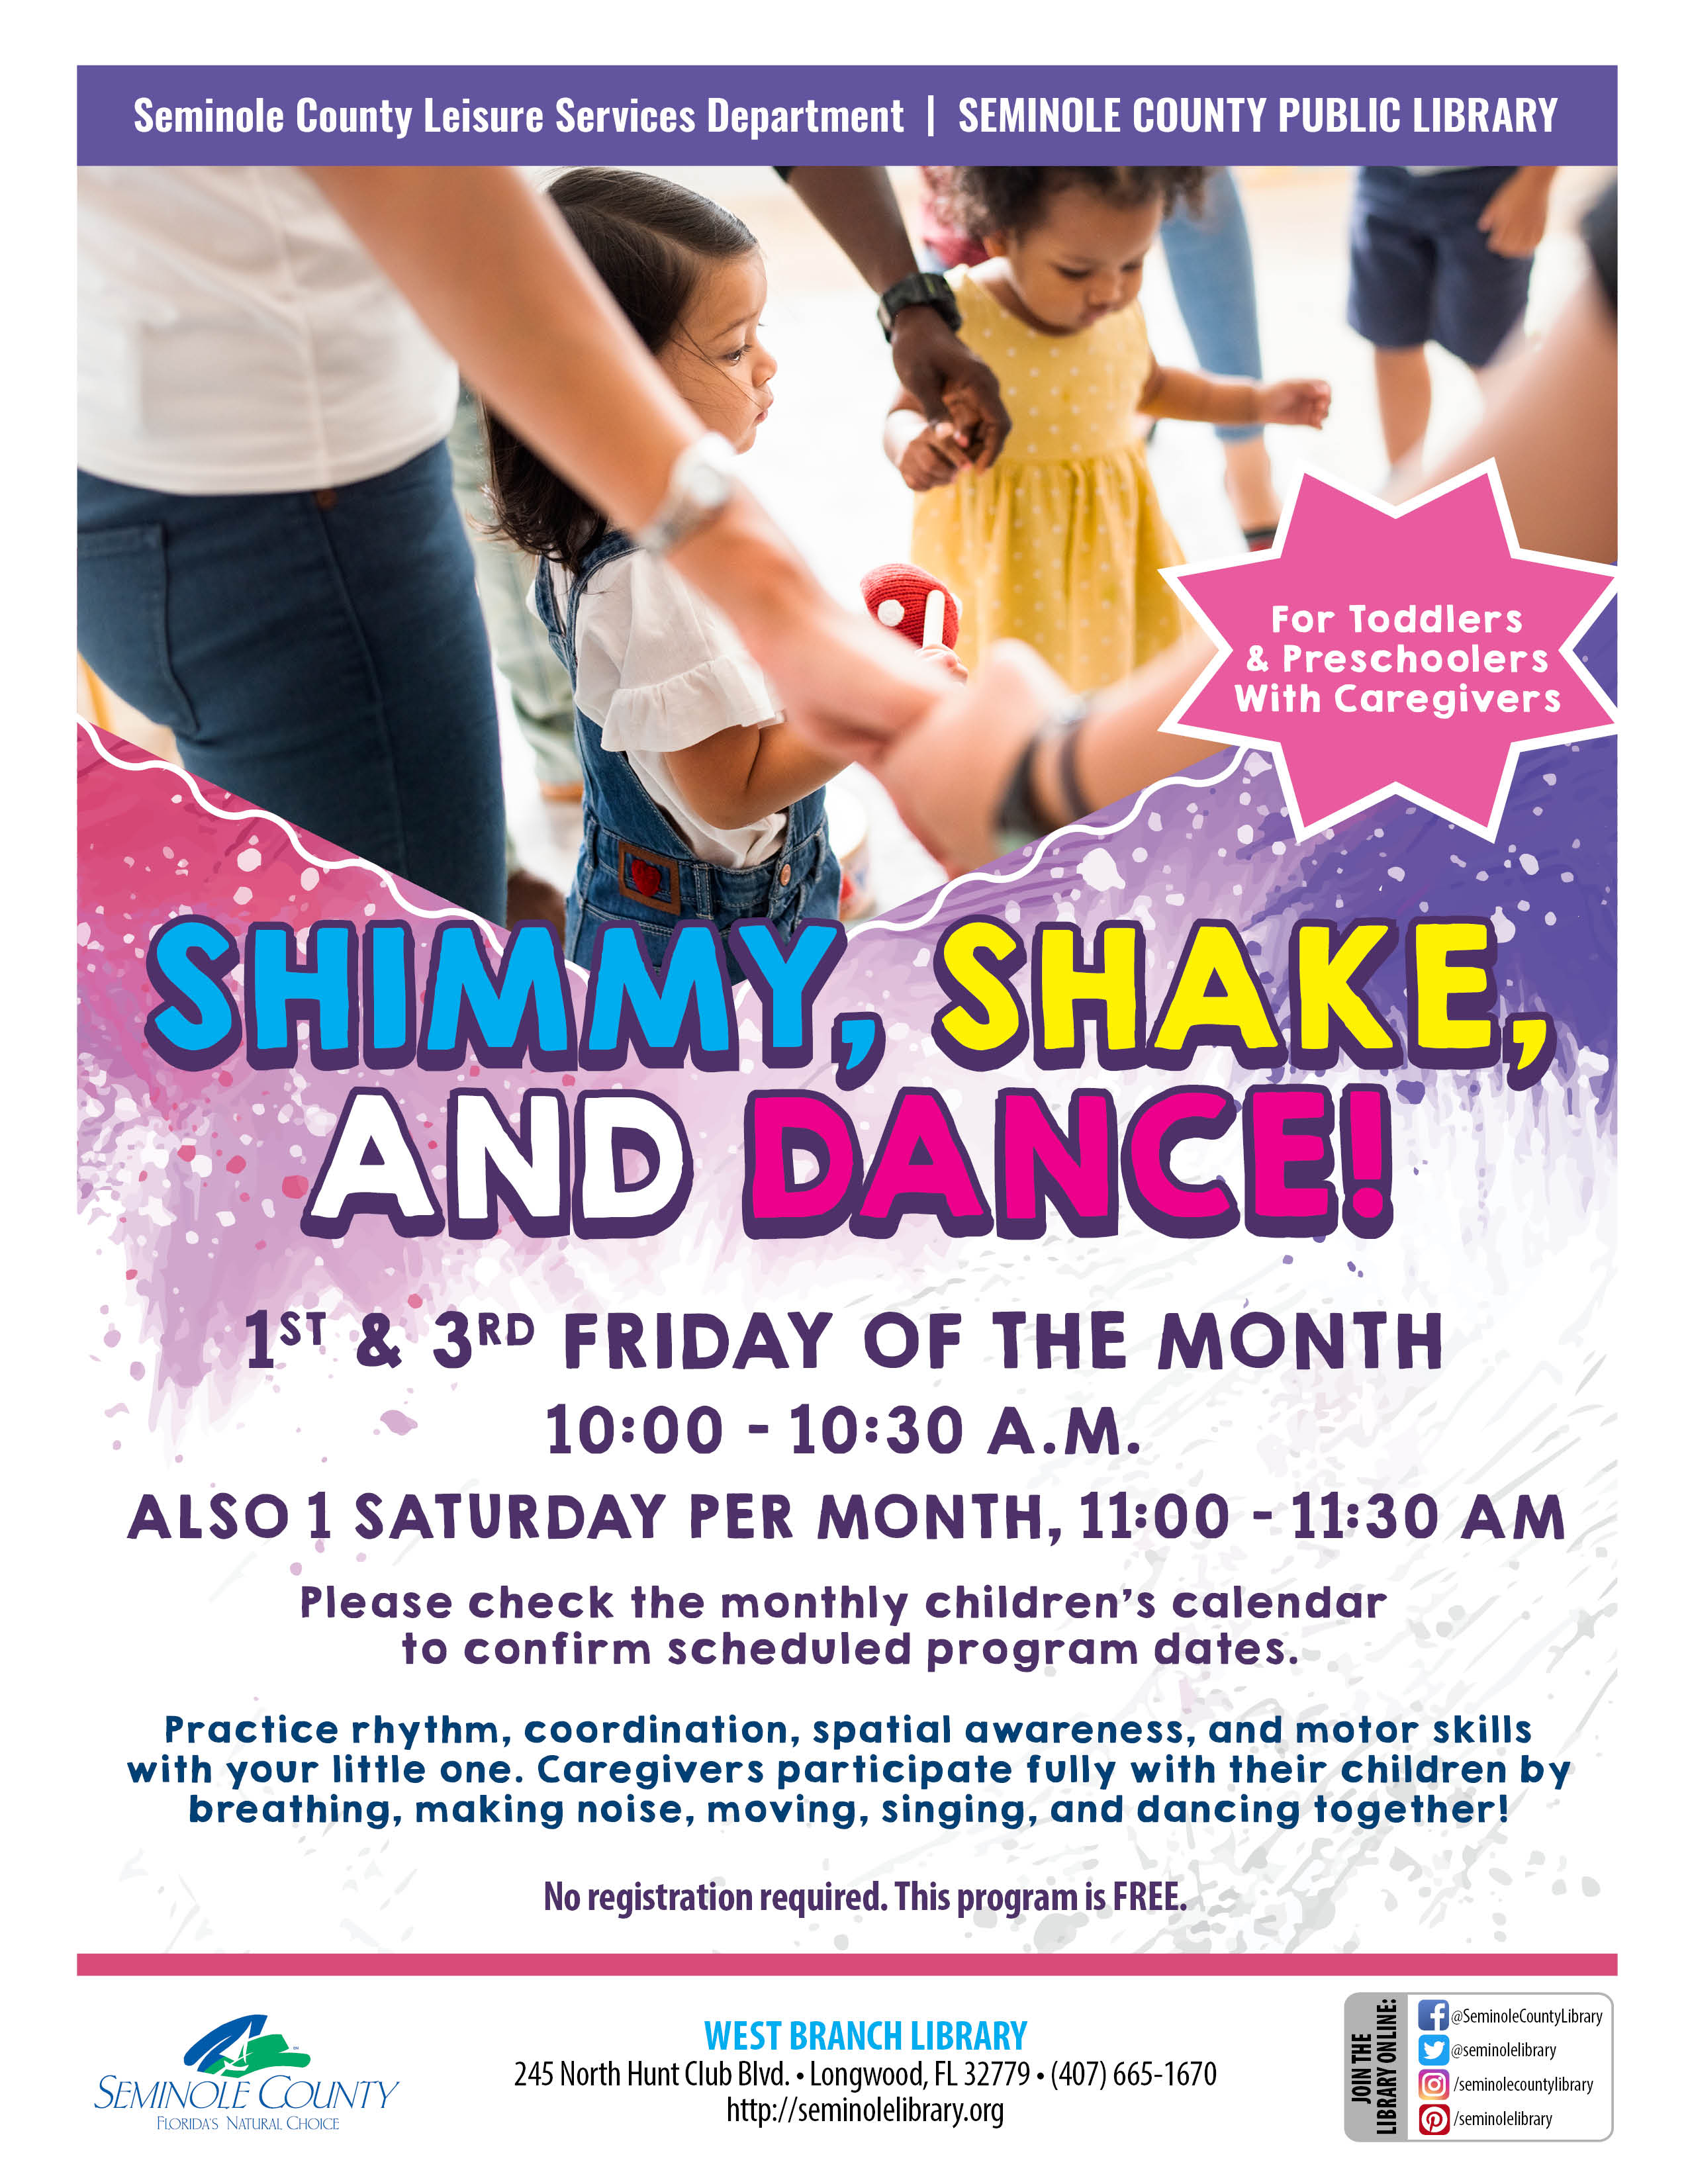 Shimmy, Shake, and Dance - West Branch Library